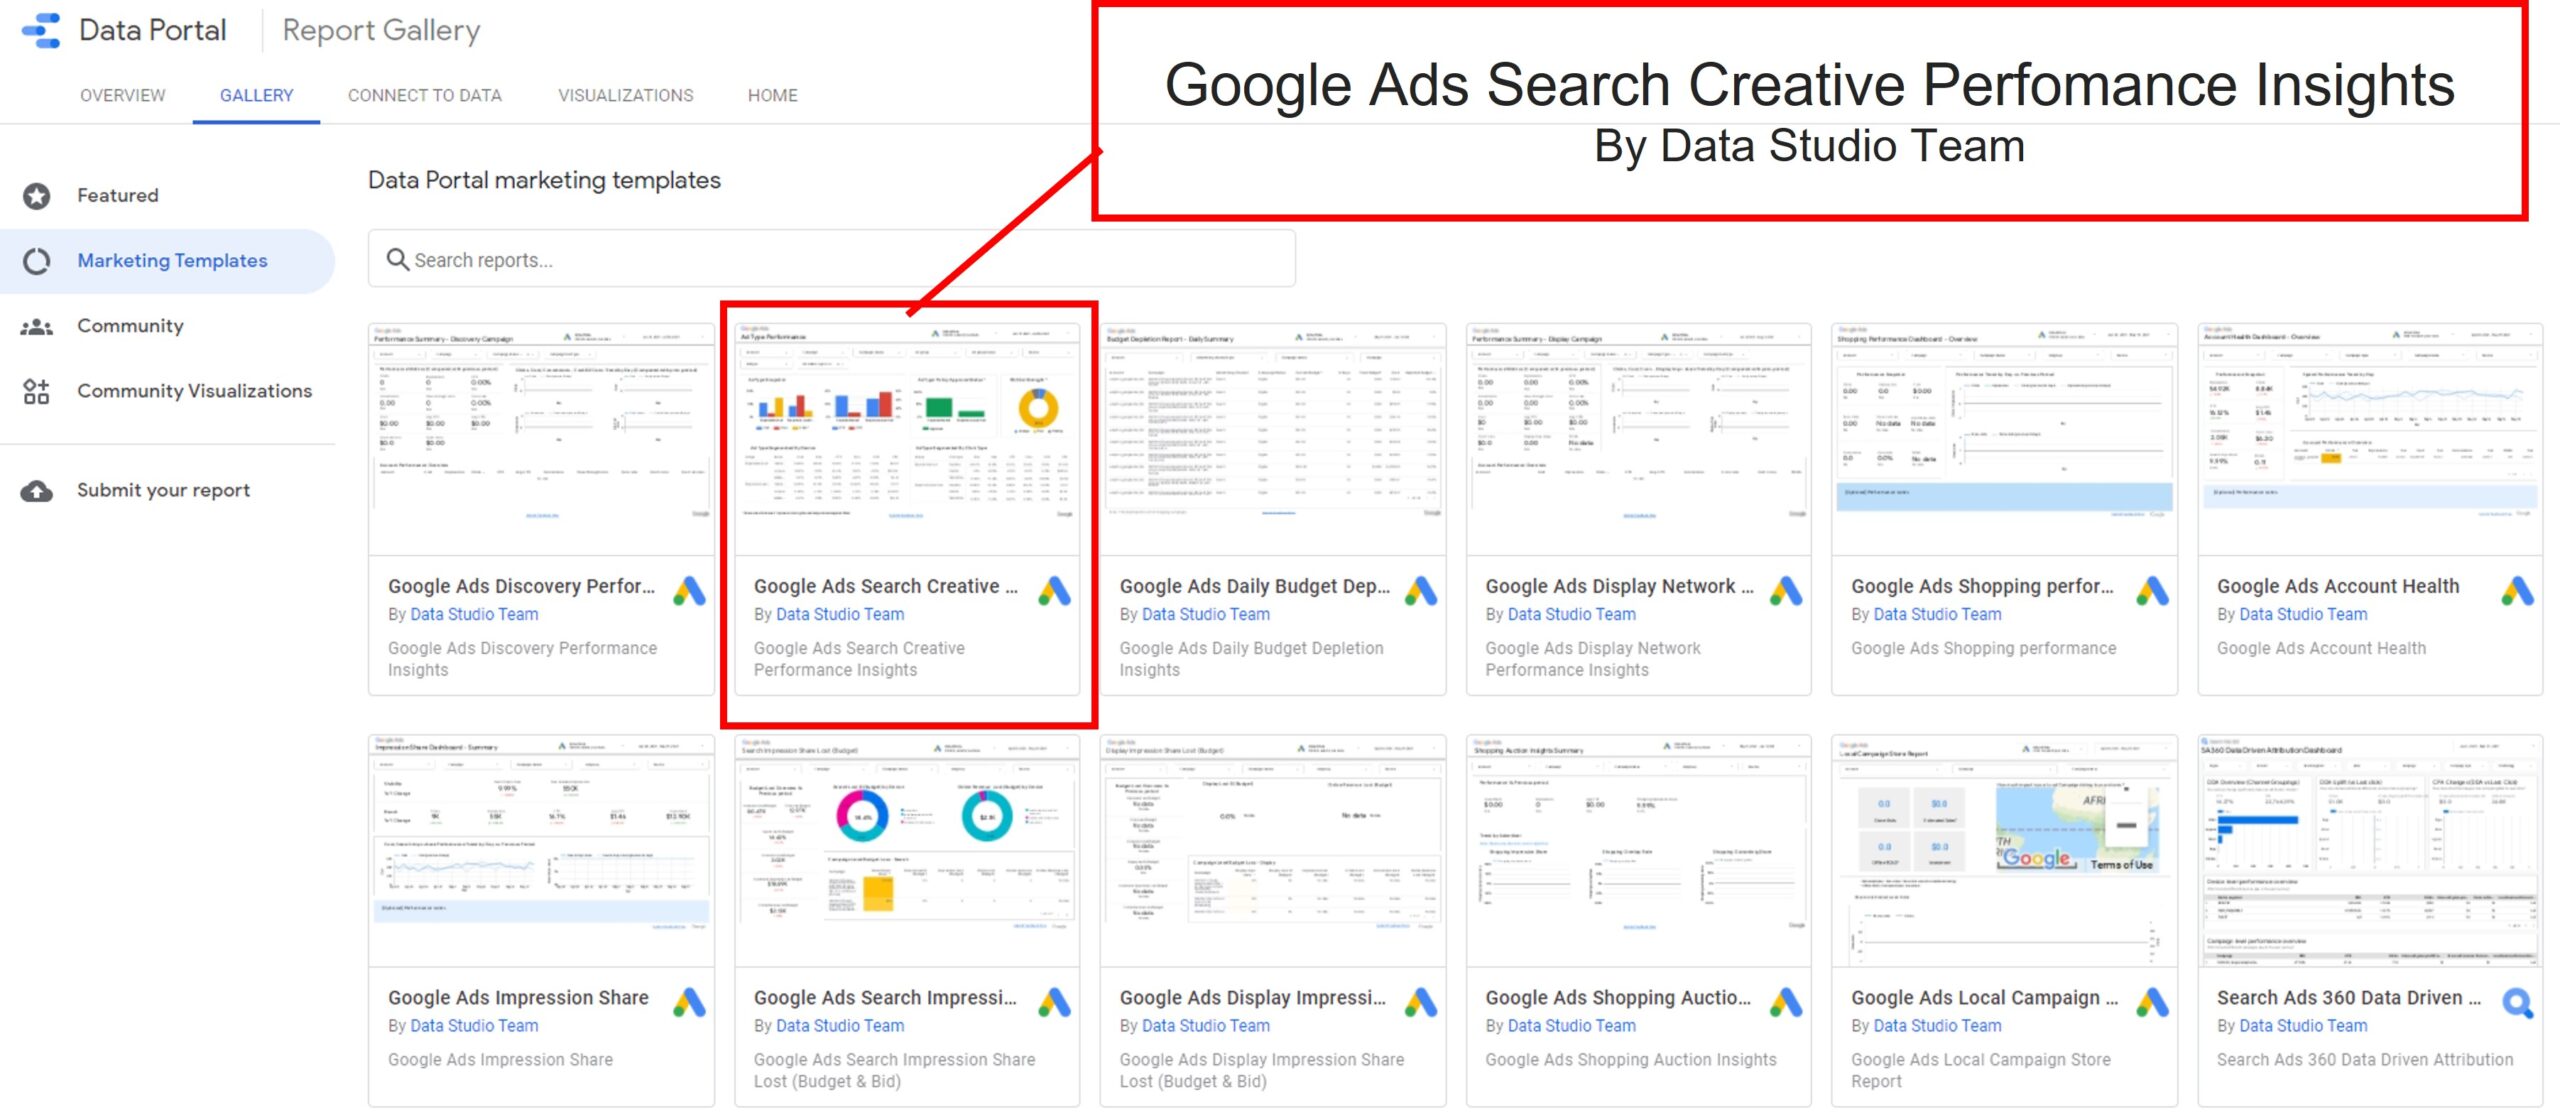 Google Ads Search Creative Performance Insights